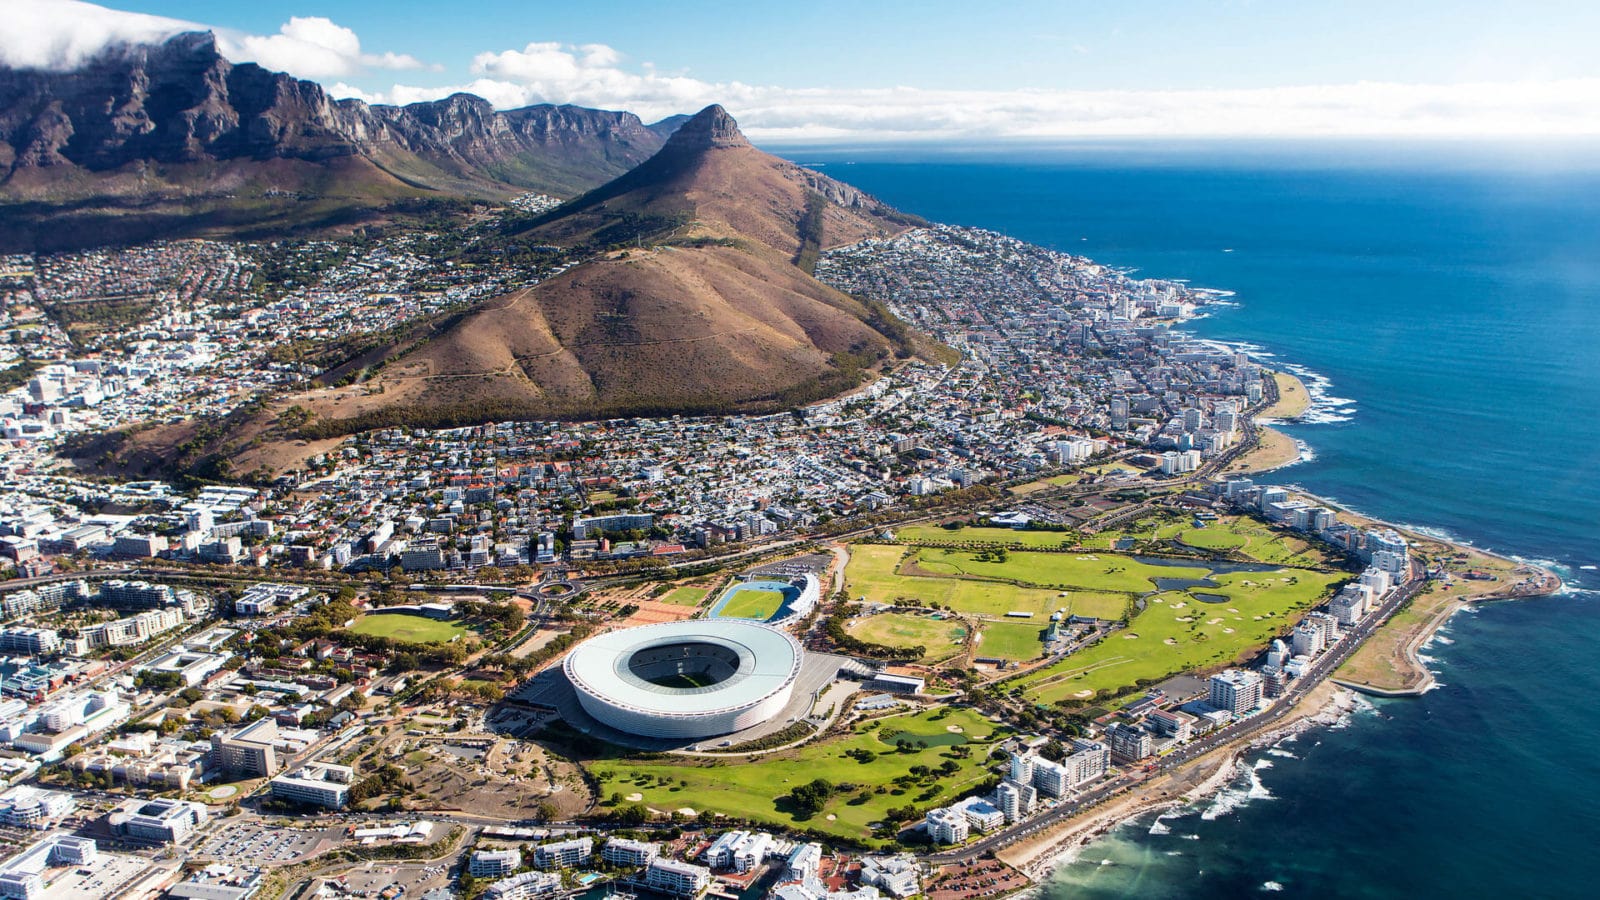 7 tourist attractions to visit in Southern Africa